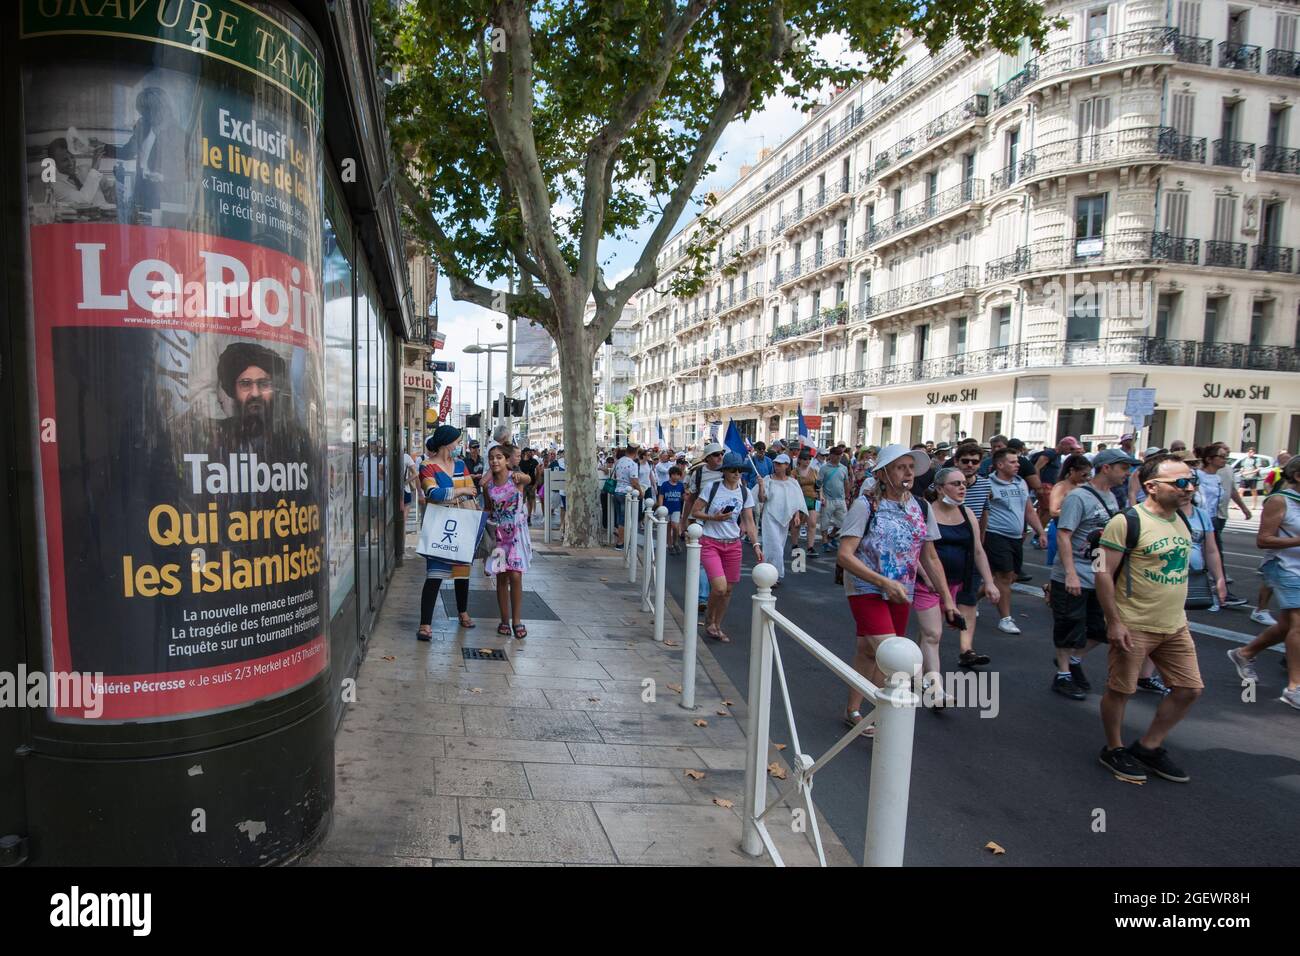 Demonstrators are seen passing a poster of the French newspaper "Le Point" which headlines the Taliban takeover in Afghanistan, during the protest.Saturday 21 August 2021 is the sixth day of mobilization against the vaccine policy and the application of the health pass. In Toulon (Var), according to the authorities there were 6000 demonstrators. The main slogans criticize the government decisions as dictatorial. Some of the placards included signs and slogans comparing the current situation with the Nazi regime and the Second World War. Stock Photo